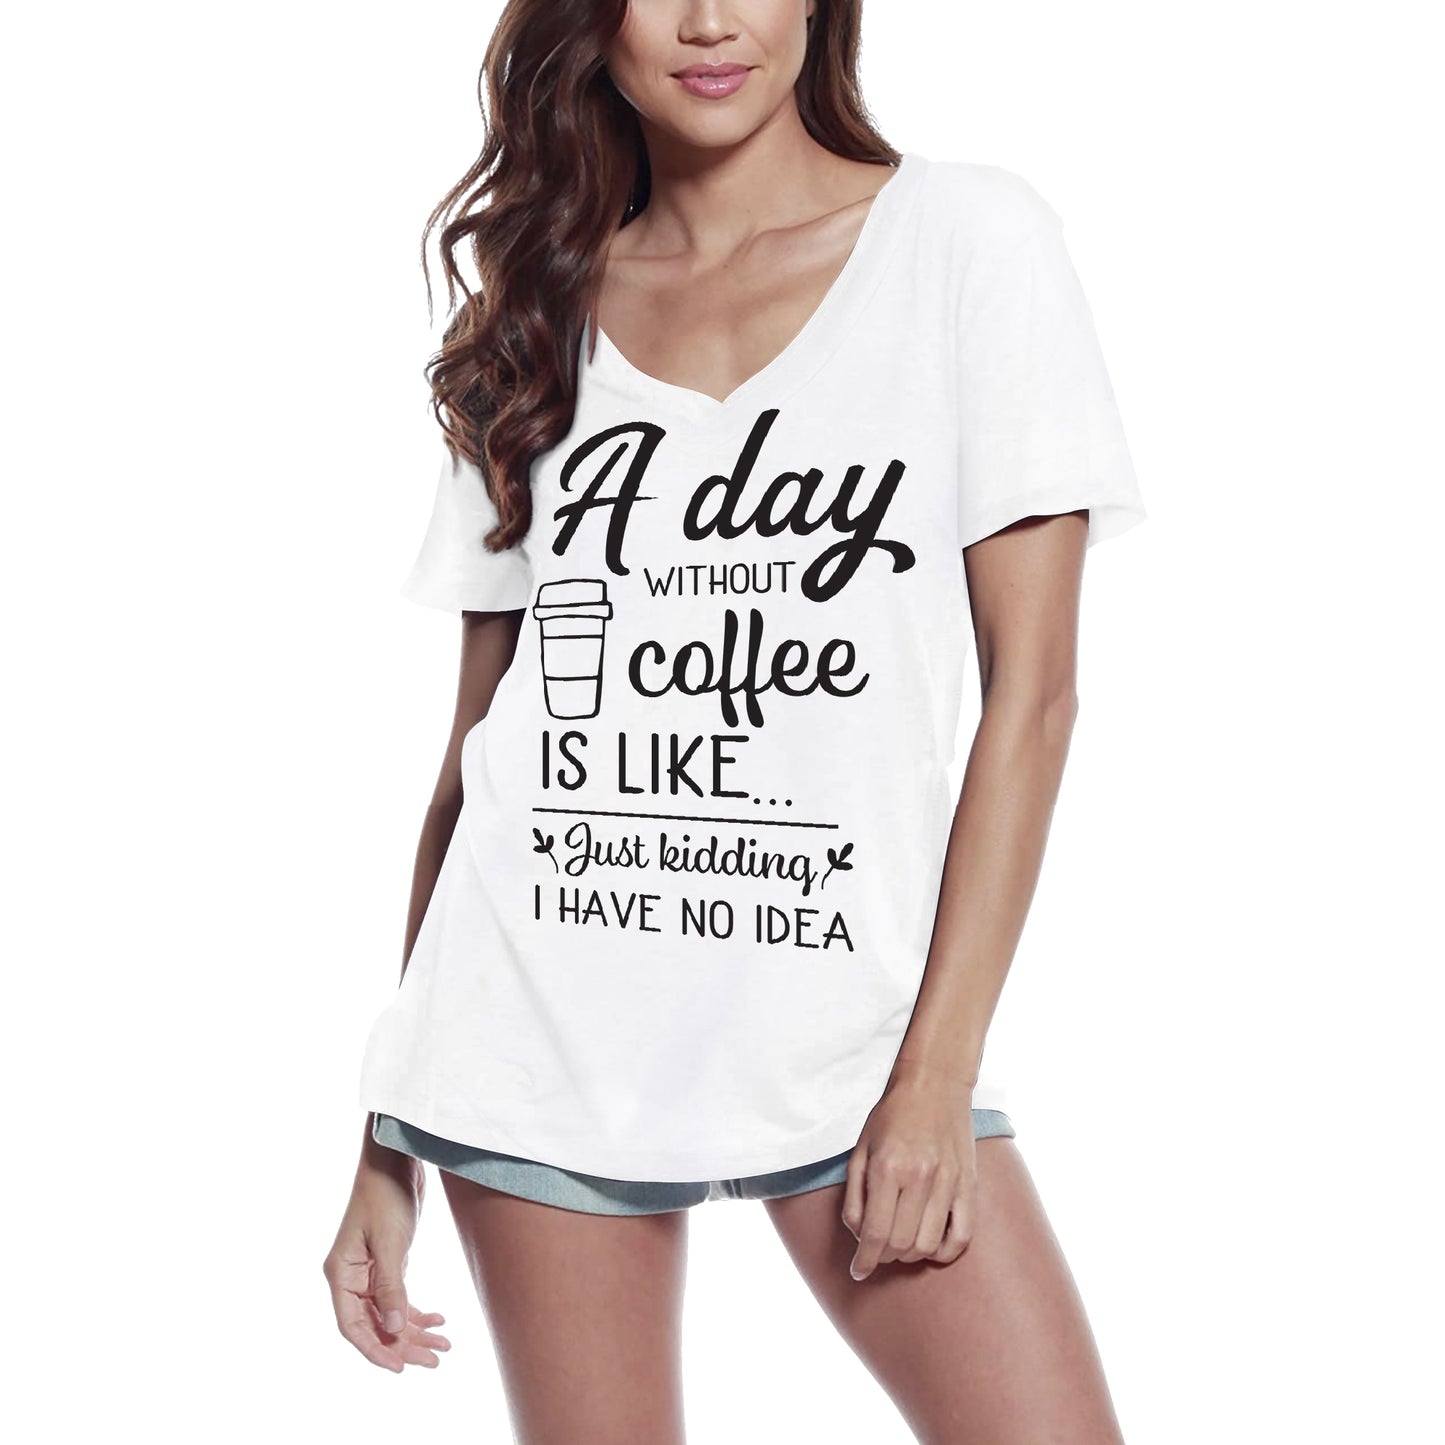 ULTRABASIC Women's T-Shirt A Day Without Coffee is Like - Just Kidding Funny Tee Shirt Tops